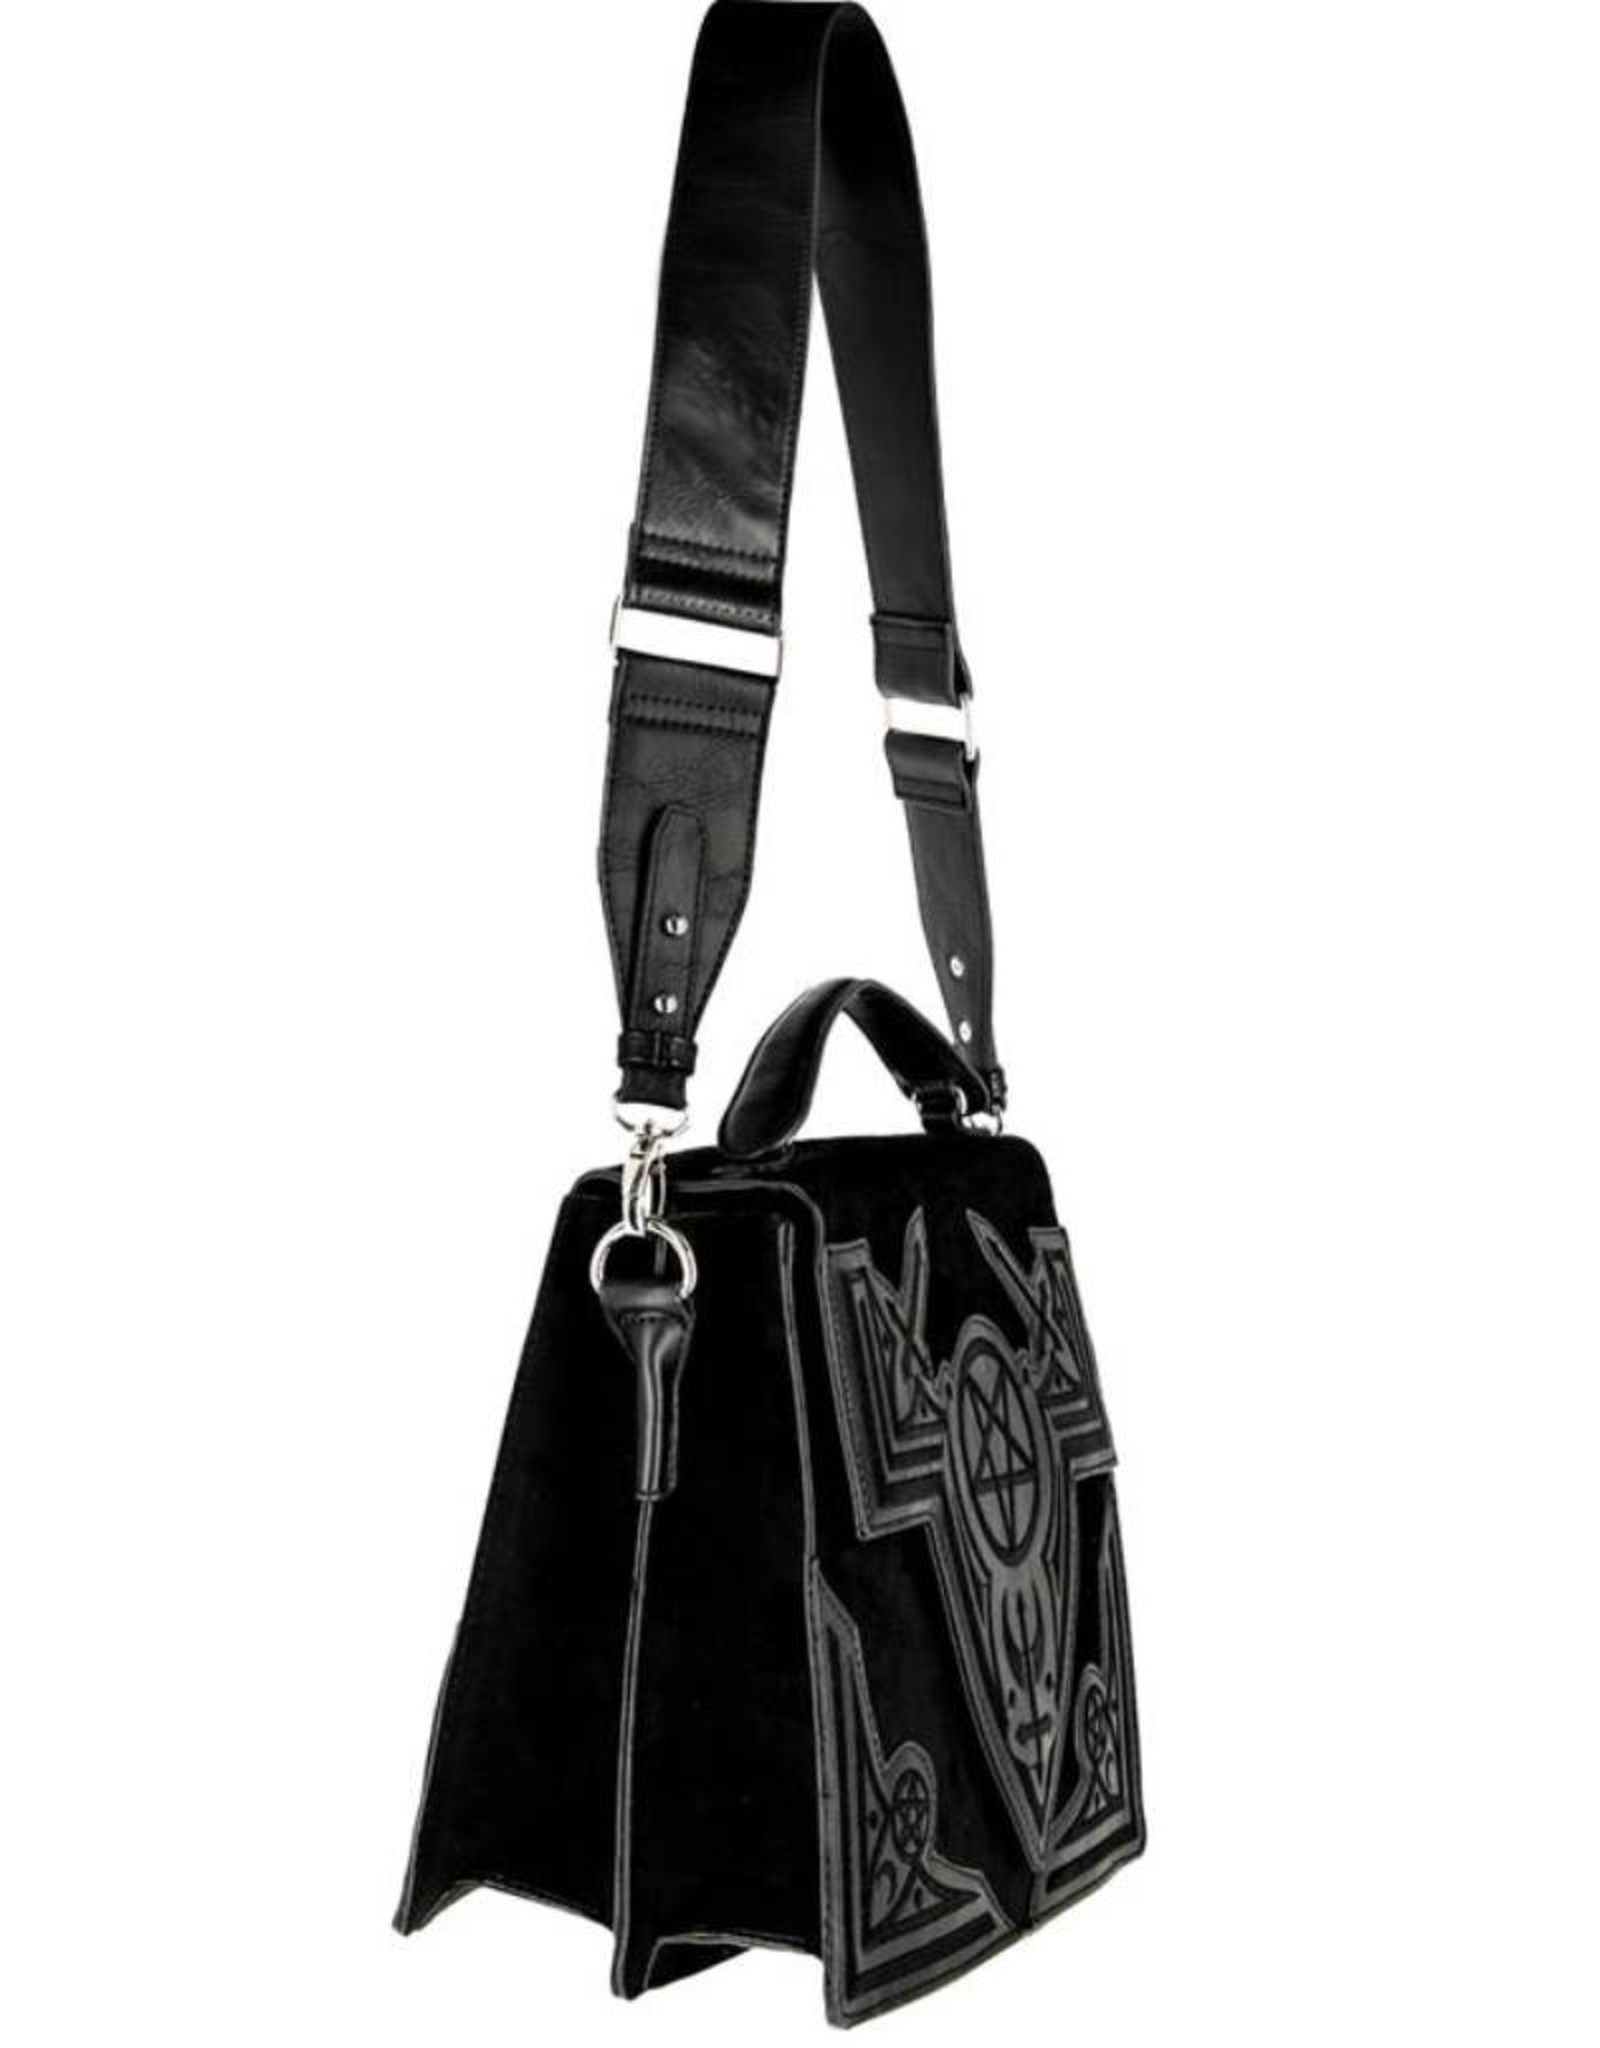 Restyle Gothic bags Steampunk bags -Amaris Purse Gothic handbag with Embroidery